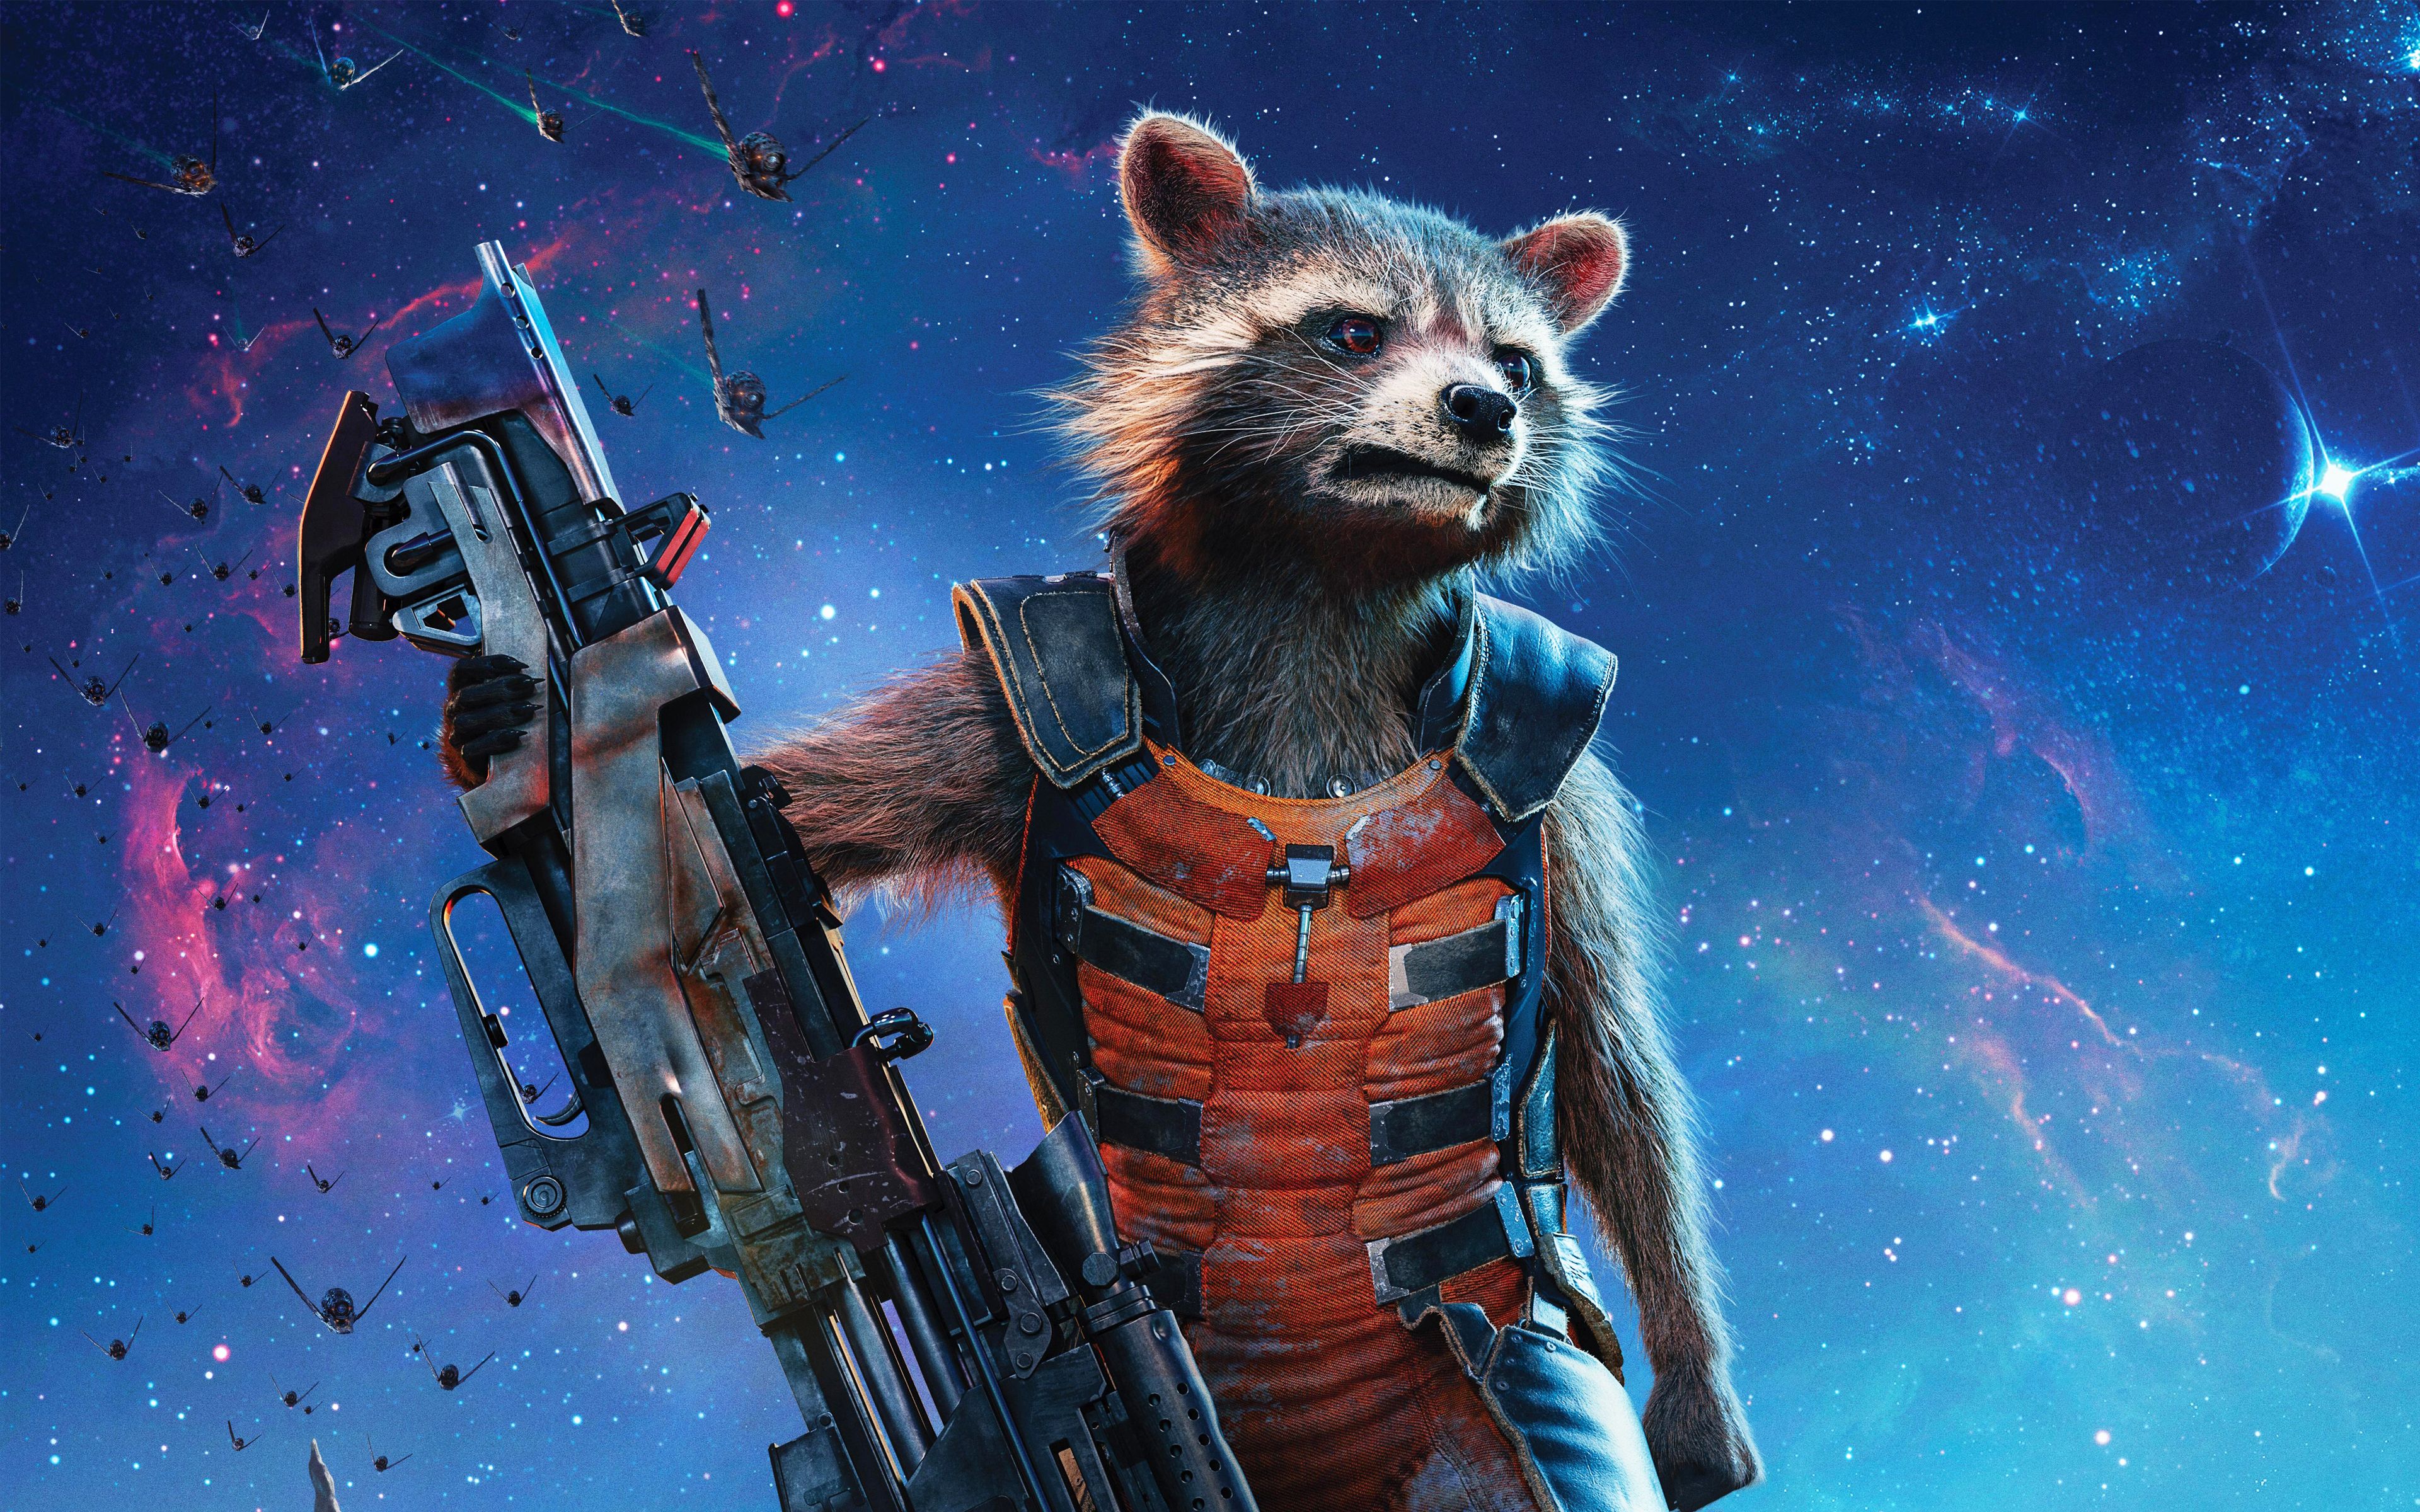 Free download Rocket Raccoon Guardians of the Galaxy Vol 2 HD Wallpaper [3840x2400] for your Desktop, Mobile & Tablet. Explore Guardians Of The Galaxy 2 Wallpaper. Guardians Of The